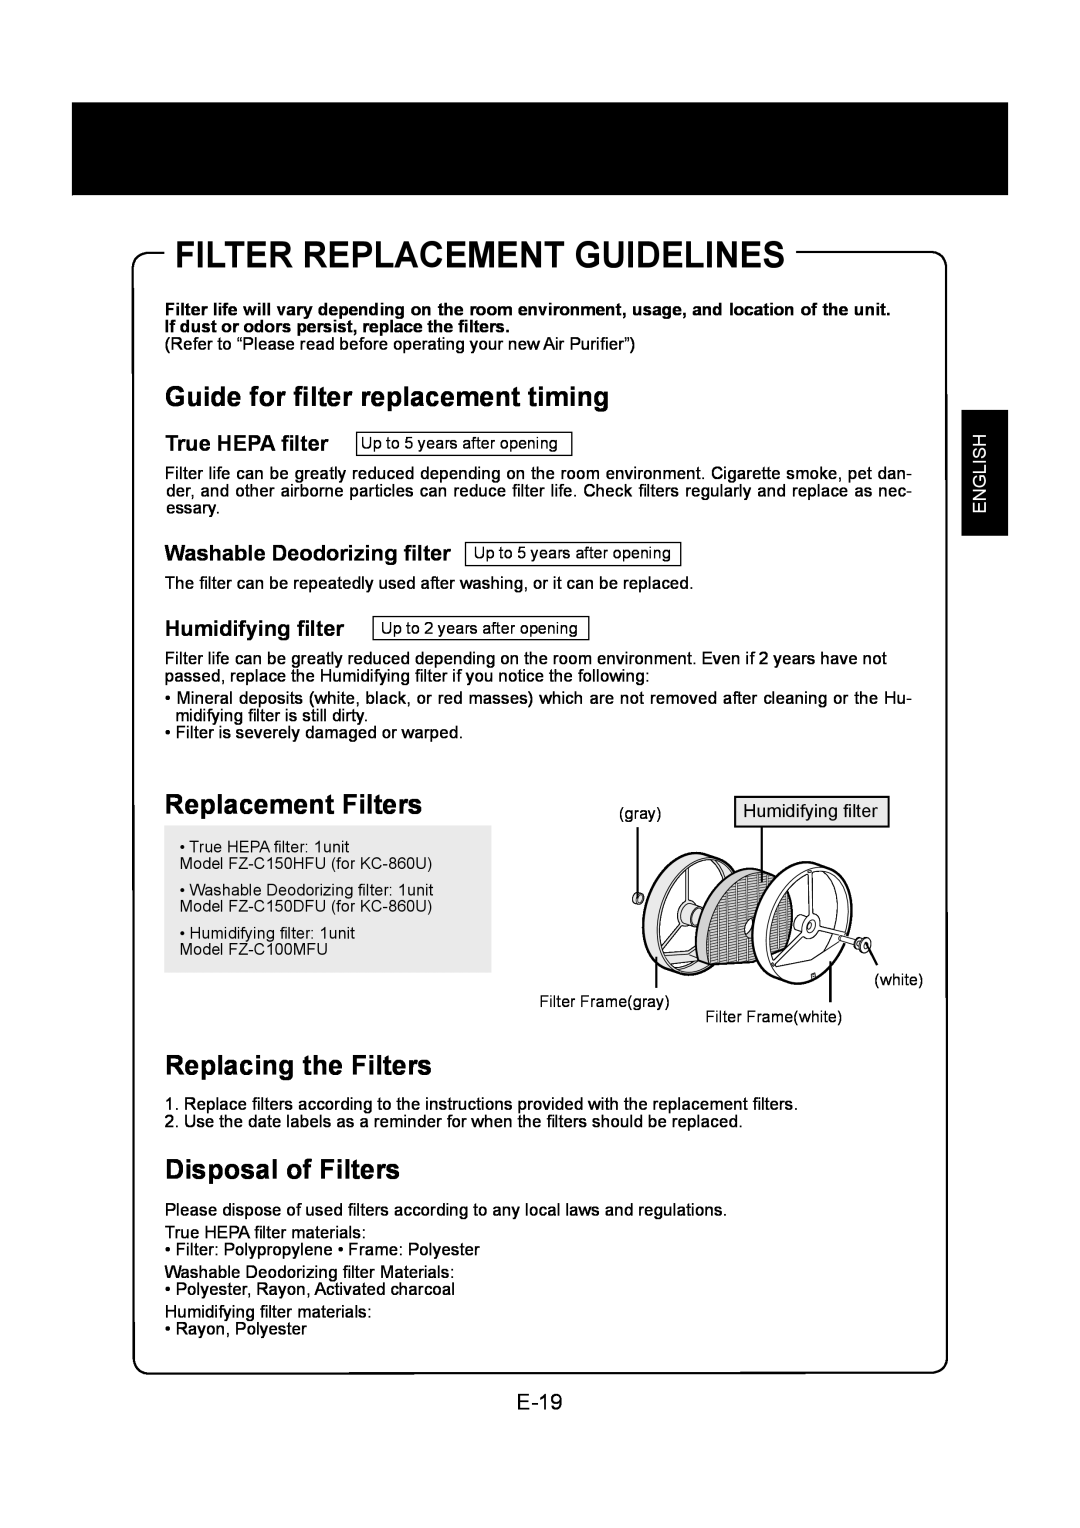 Sharp KC-860U Filter Replacement Guidelines, Guide for ﬁlter replacement timing, Replacement Filters, Disposal of Filters 